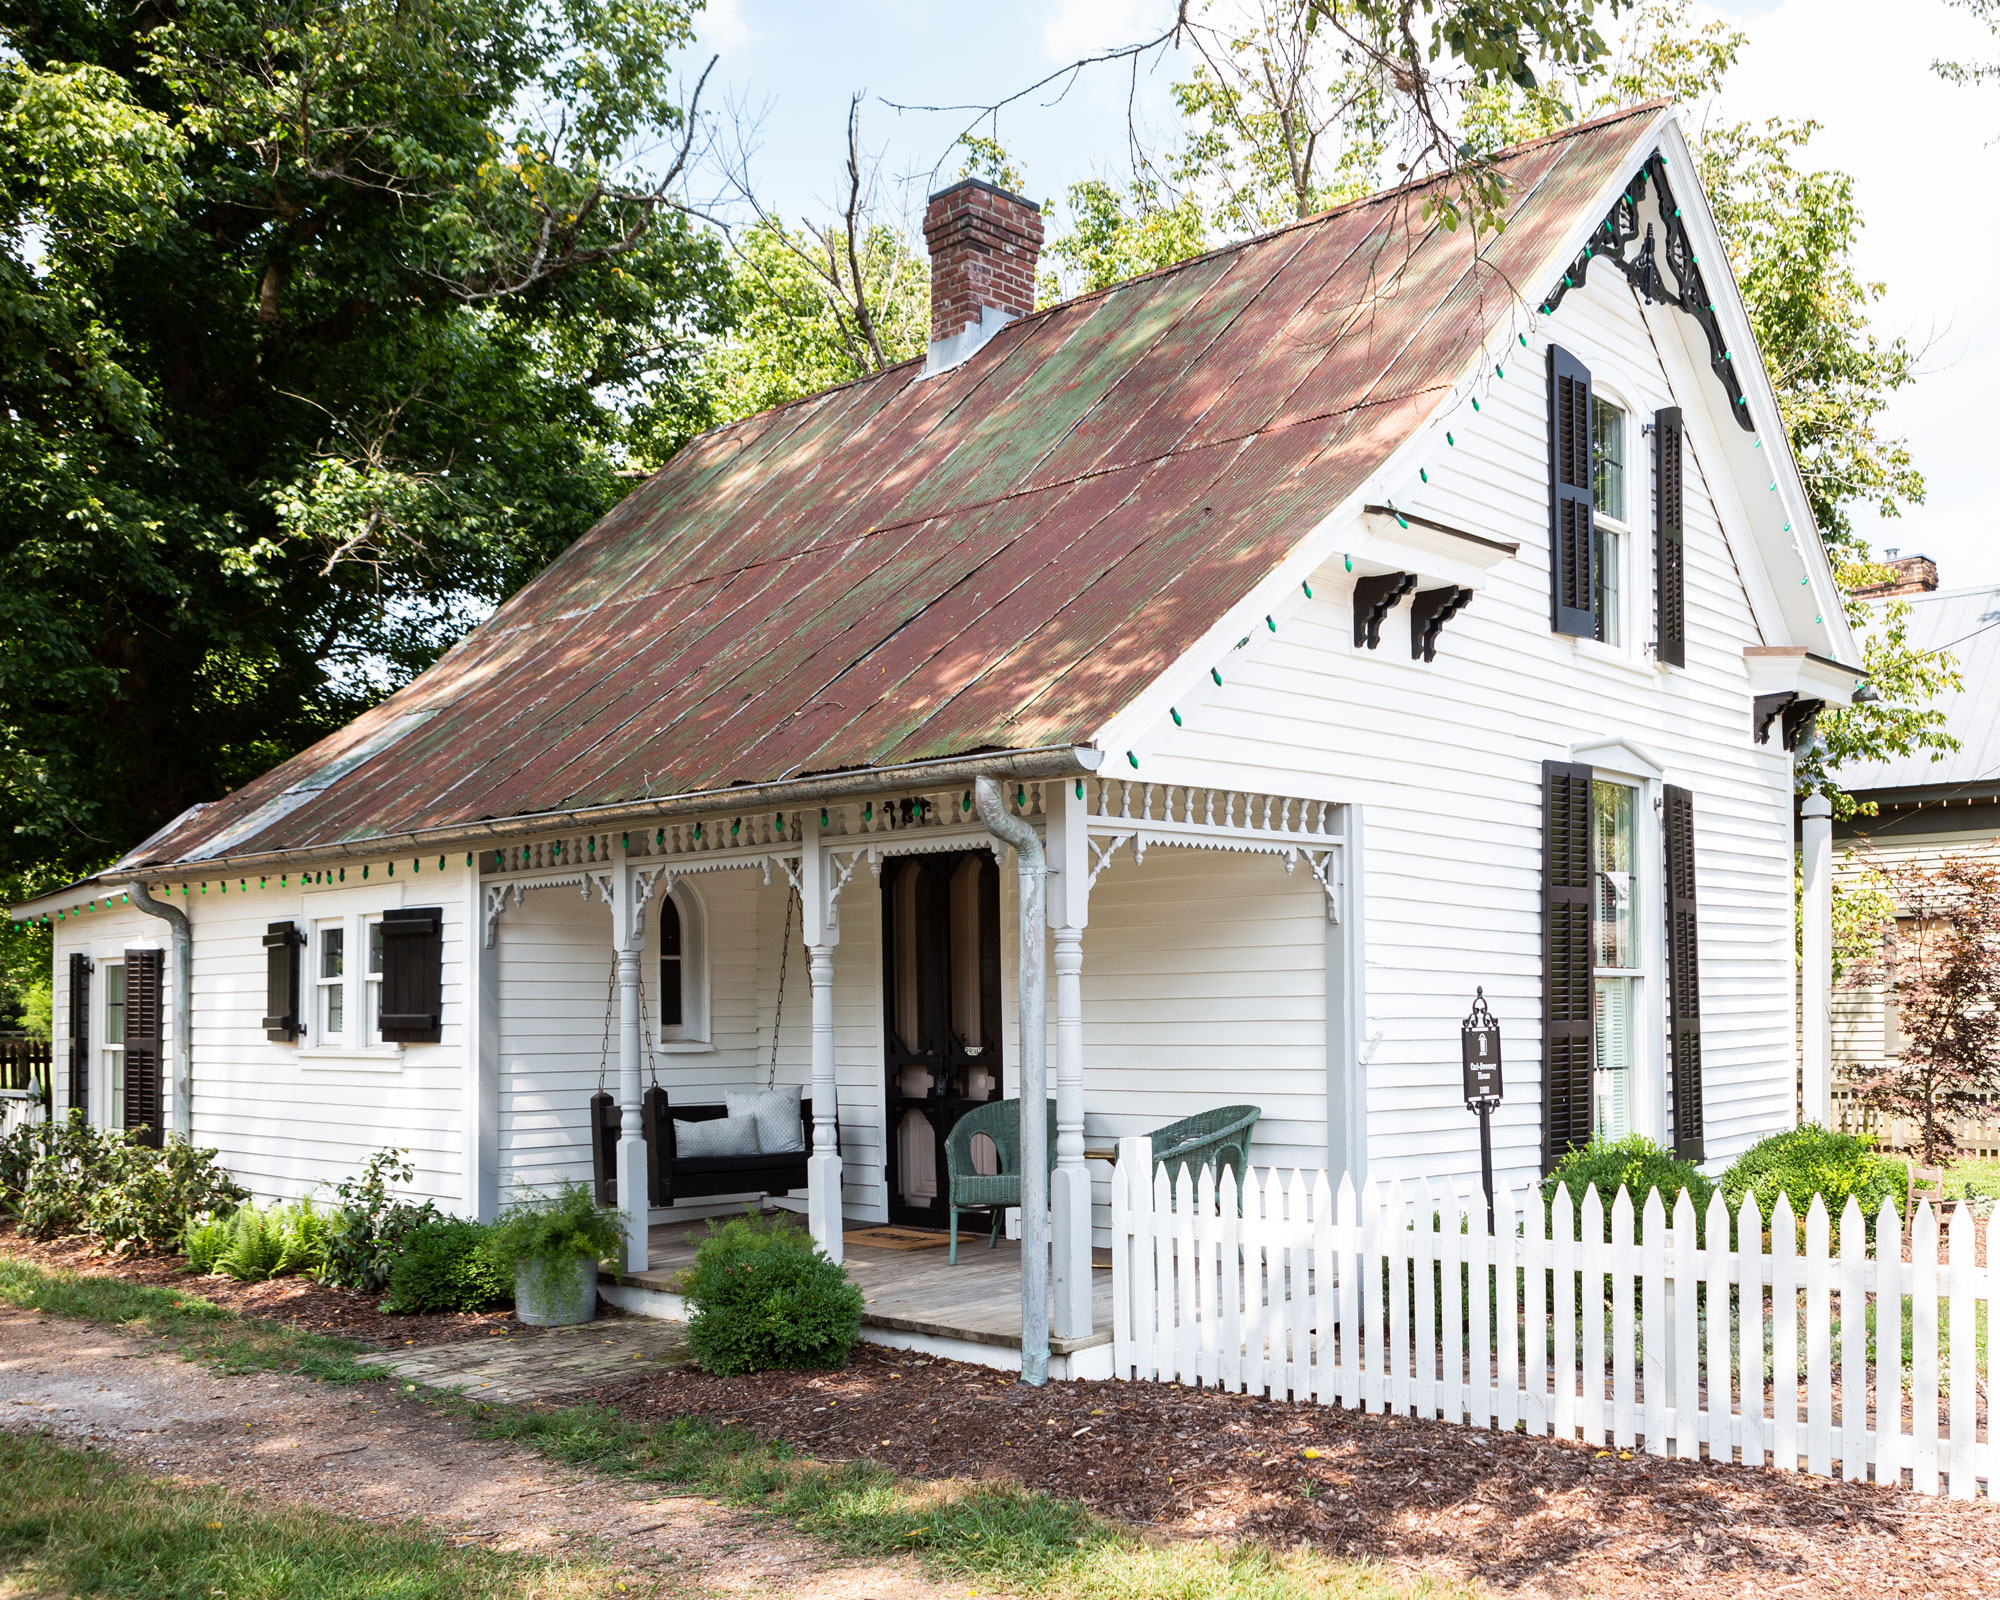 Holly’s tin-roofed Victorian cottage in Leiper’s Fork, Tennessee, built in the early 1890s for Carl Sweeney and his family, is only about 1,200 square feet. “So it’s too small to be a home for me, my husband, and three kids,” she says. “But it’s a d…